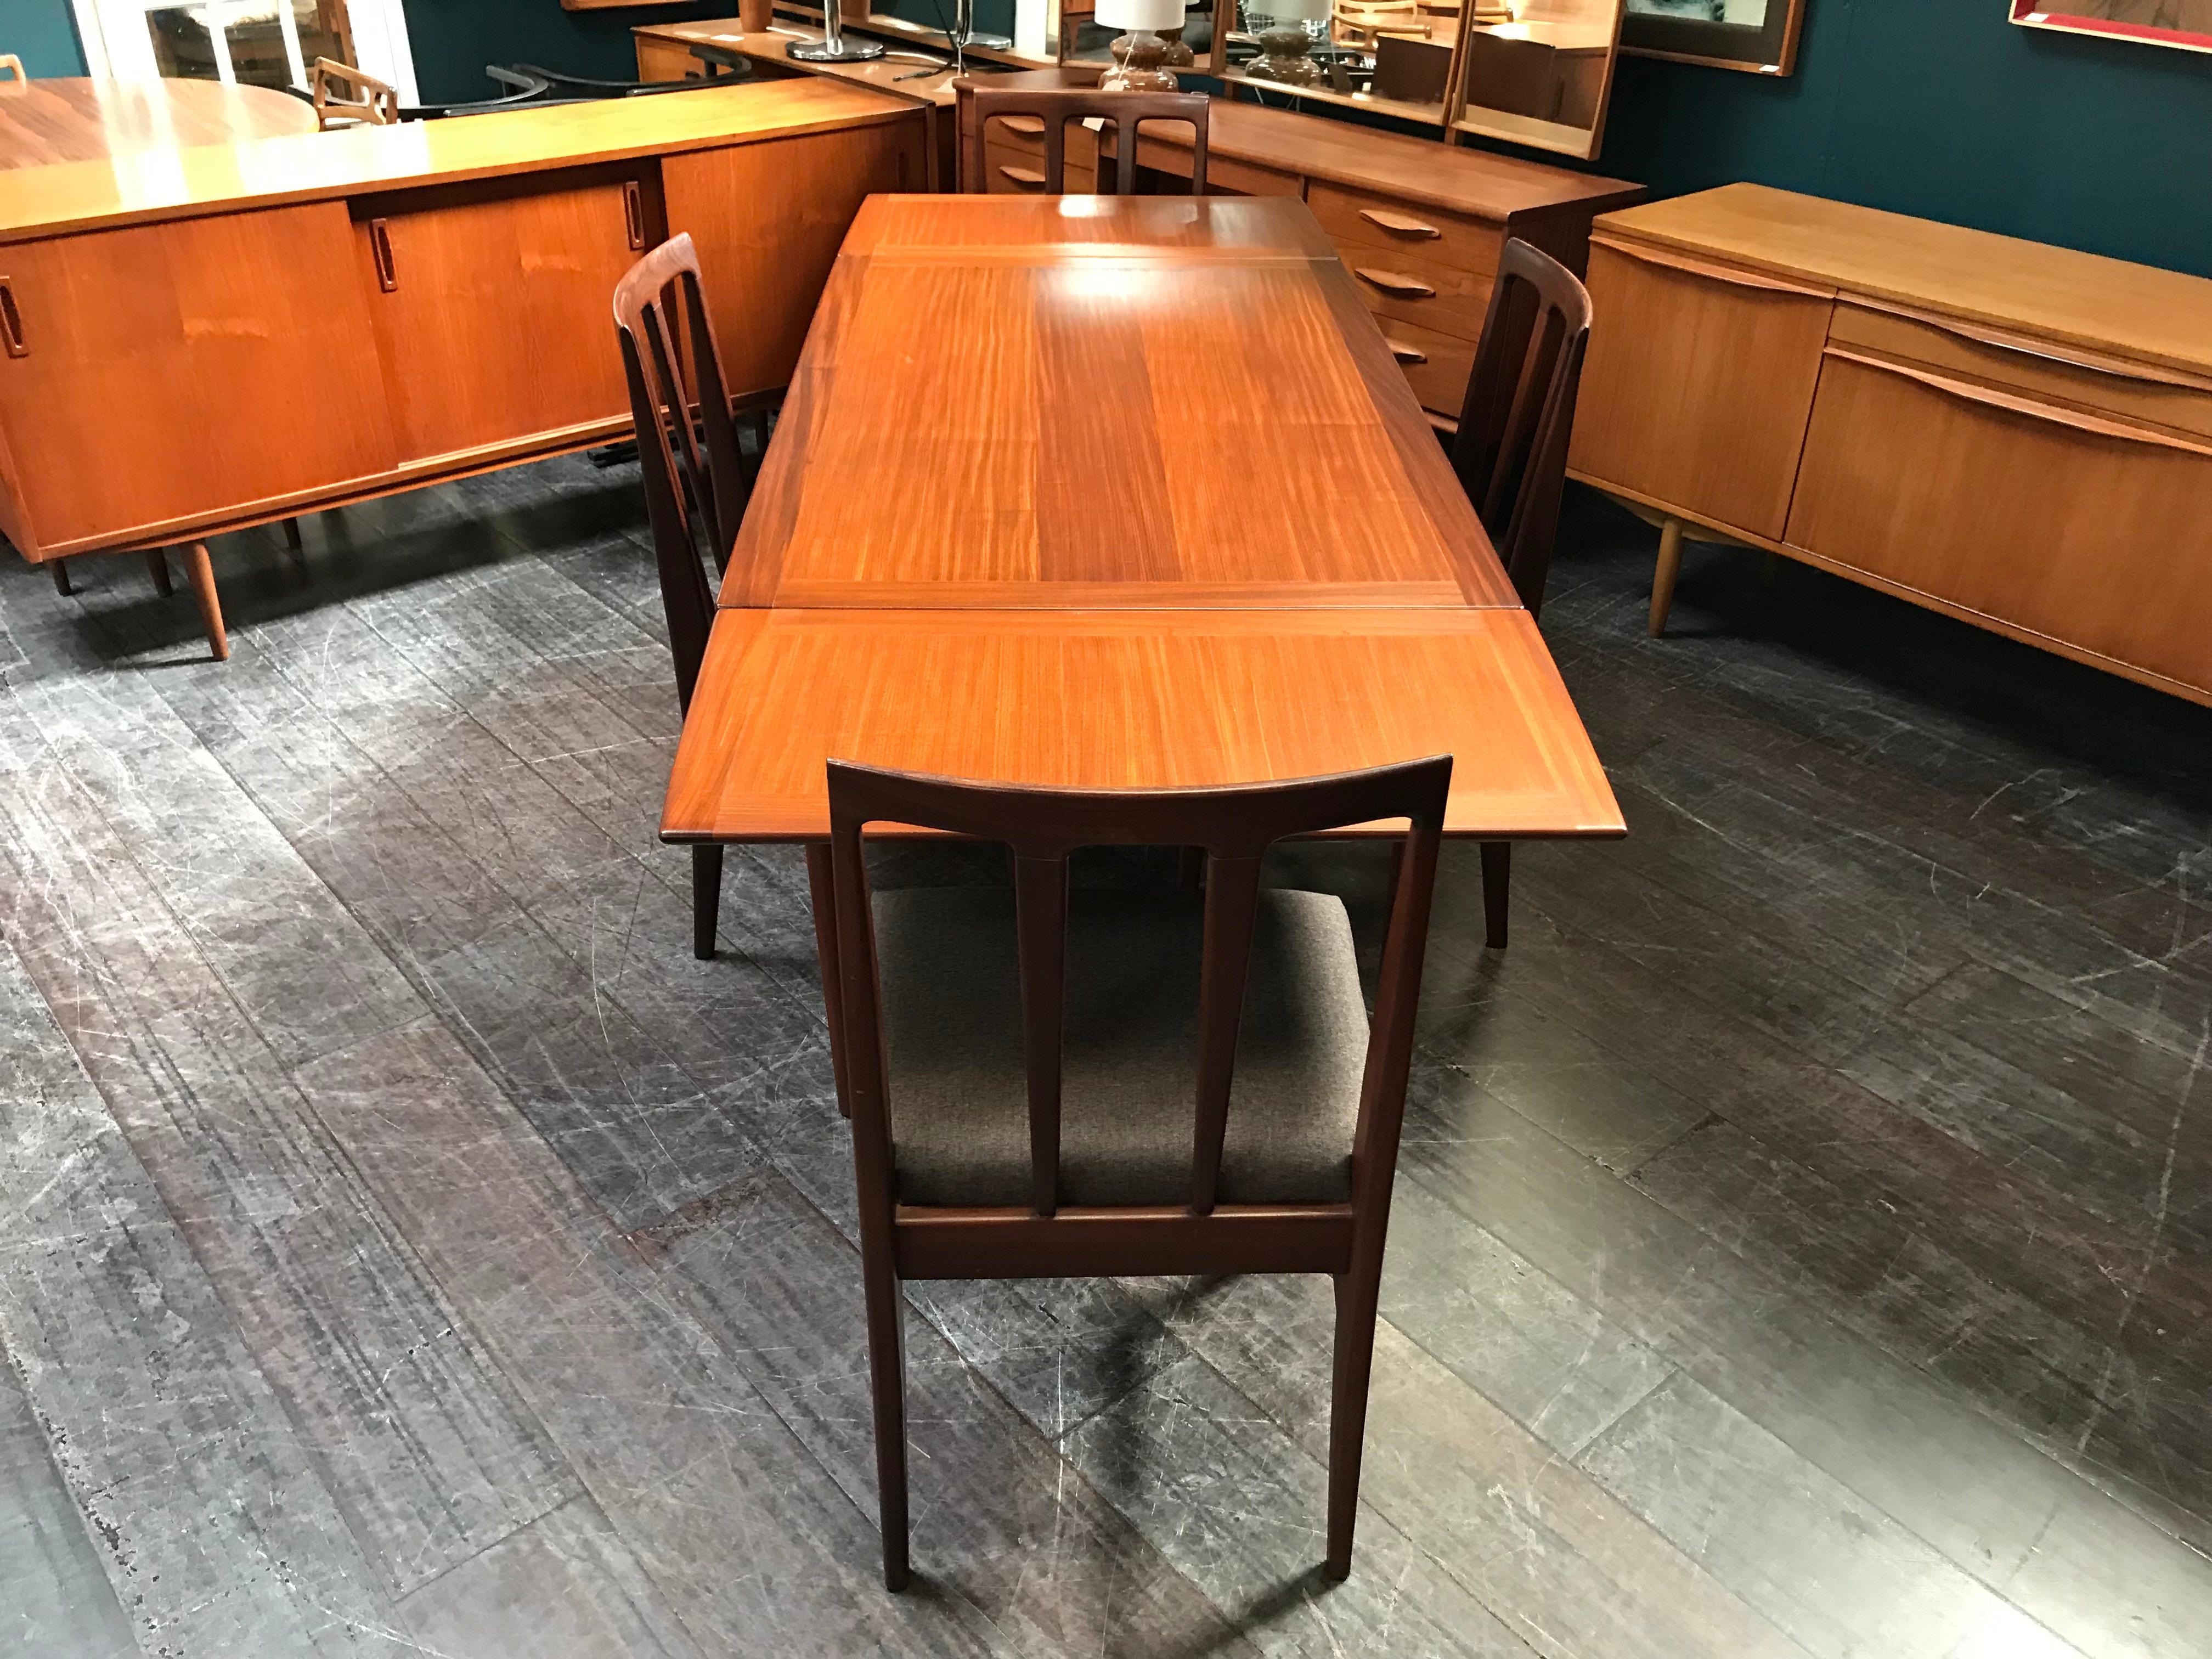 Extending Midcentury Afrormosia Dining Table with 4 Chairs by Younger of Glasgow For Sale 7